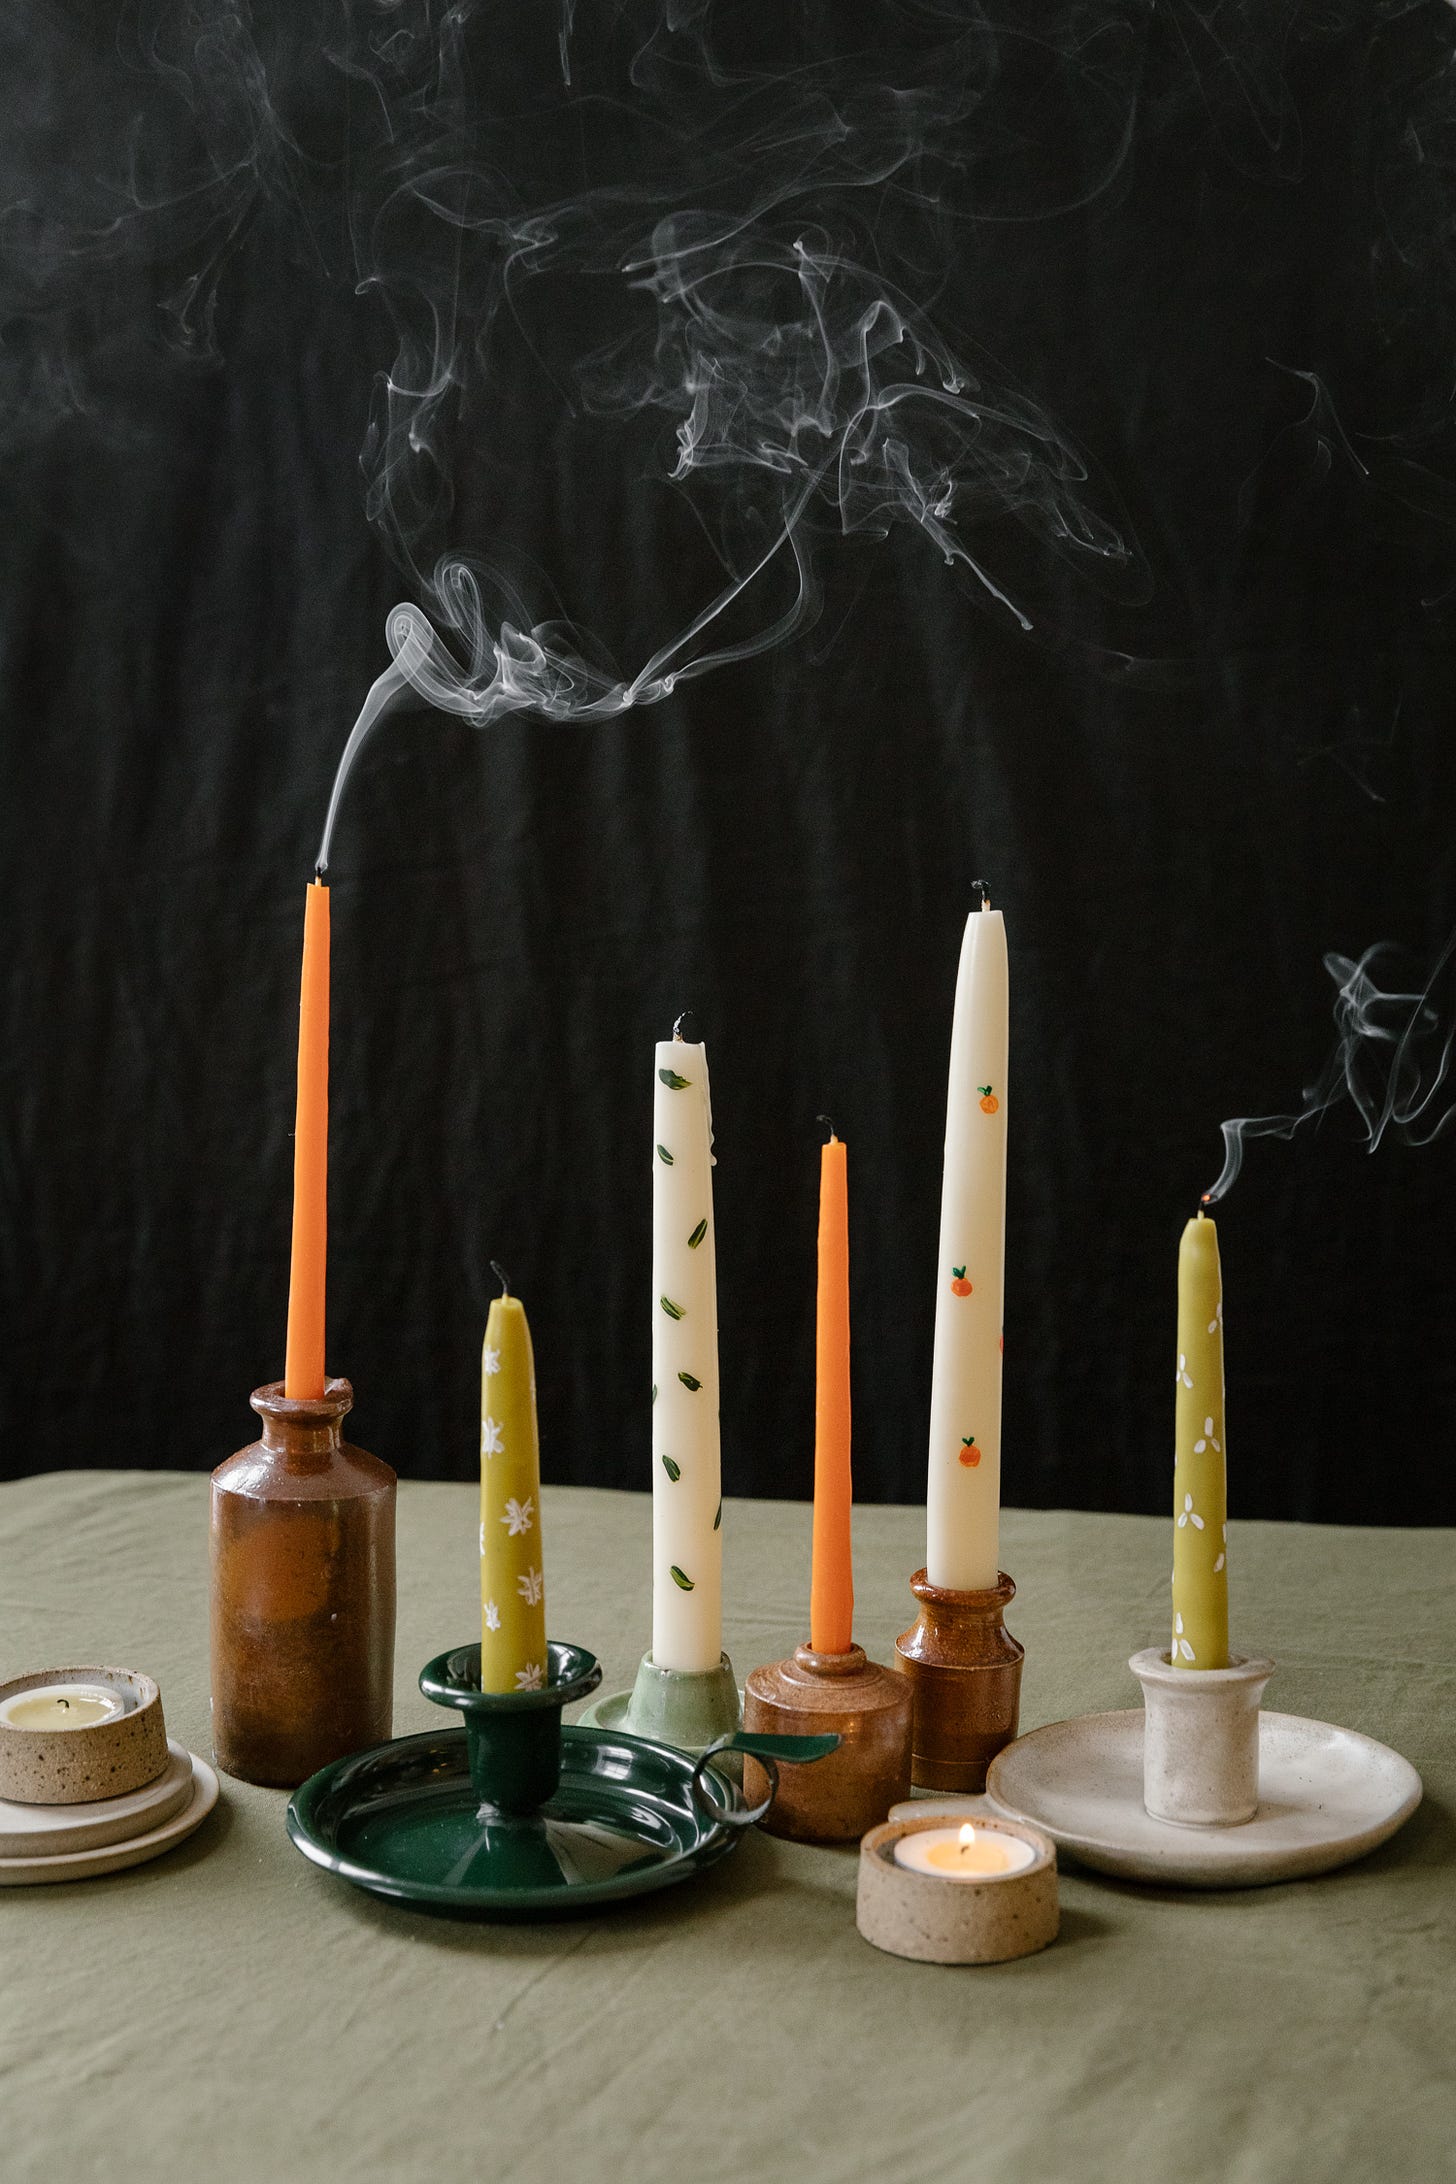 A group of tall dinner candles on a table. They are all smokey as they have just been blown out.